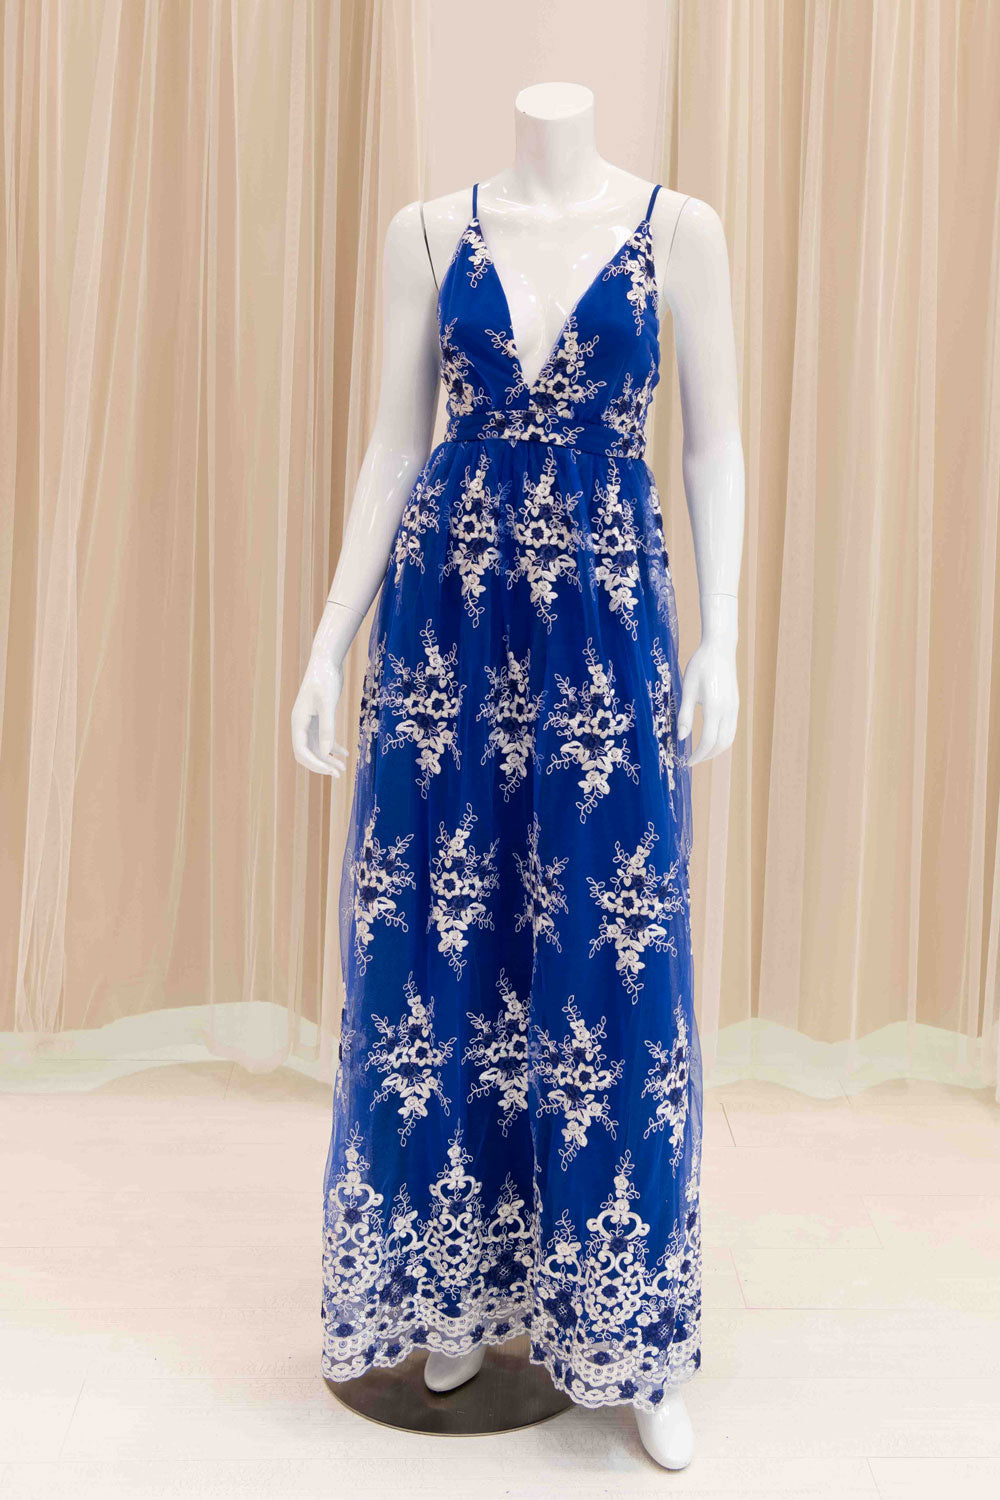 Royal Blue Mesh Sun Dress with White Floral Embroidery